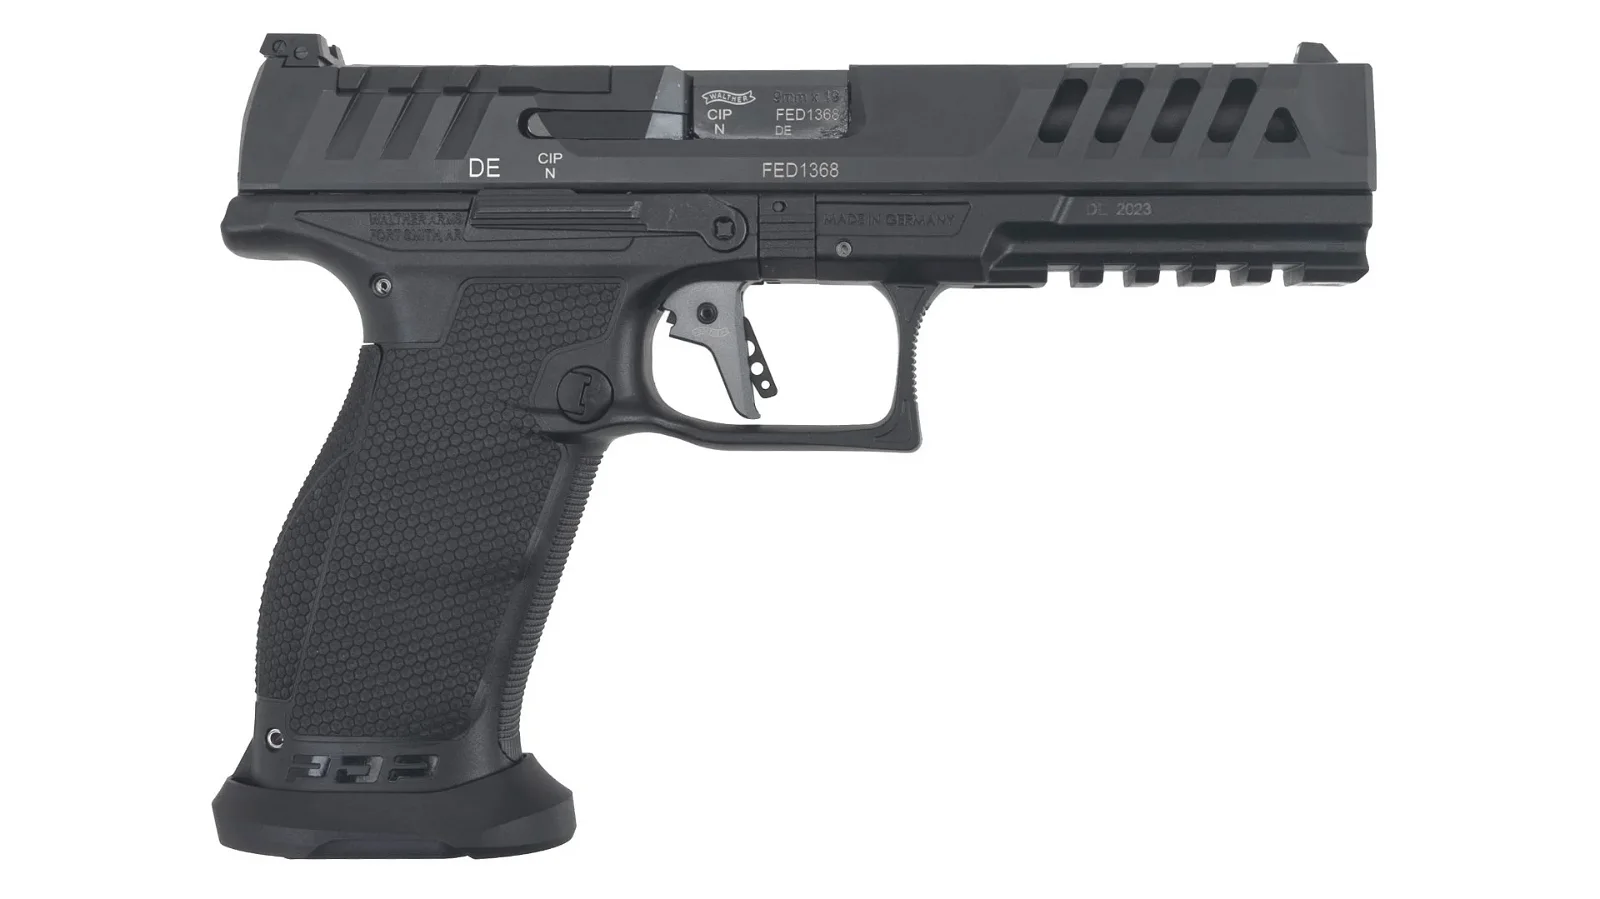 Walther PDP Match Full Size 9mm Pistol - 5"